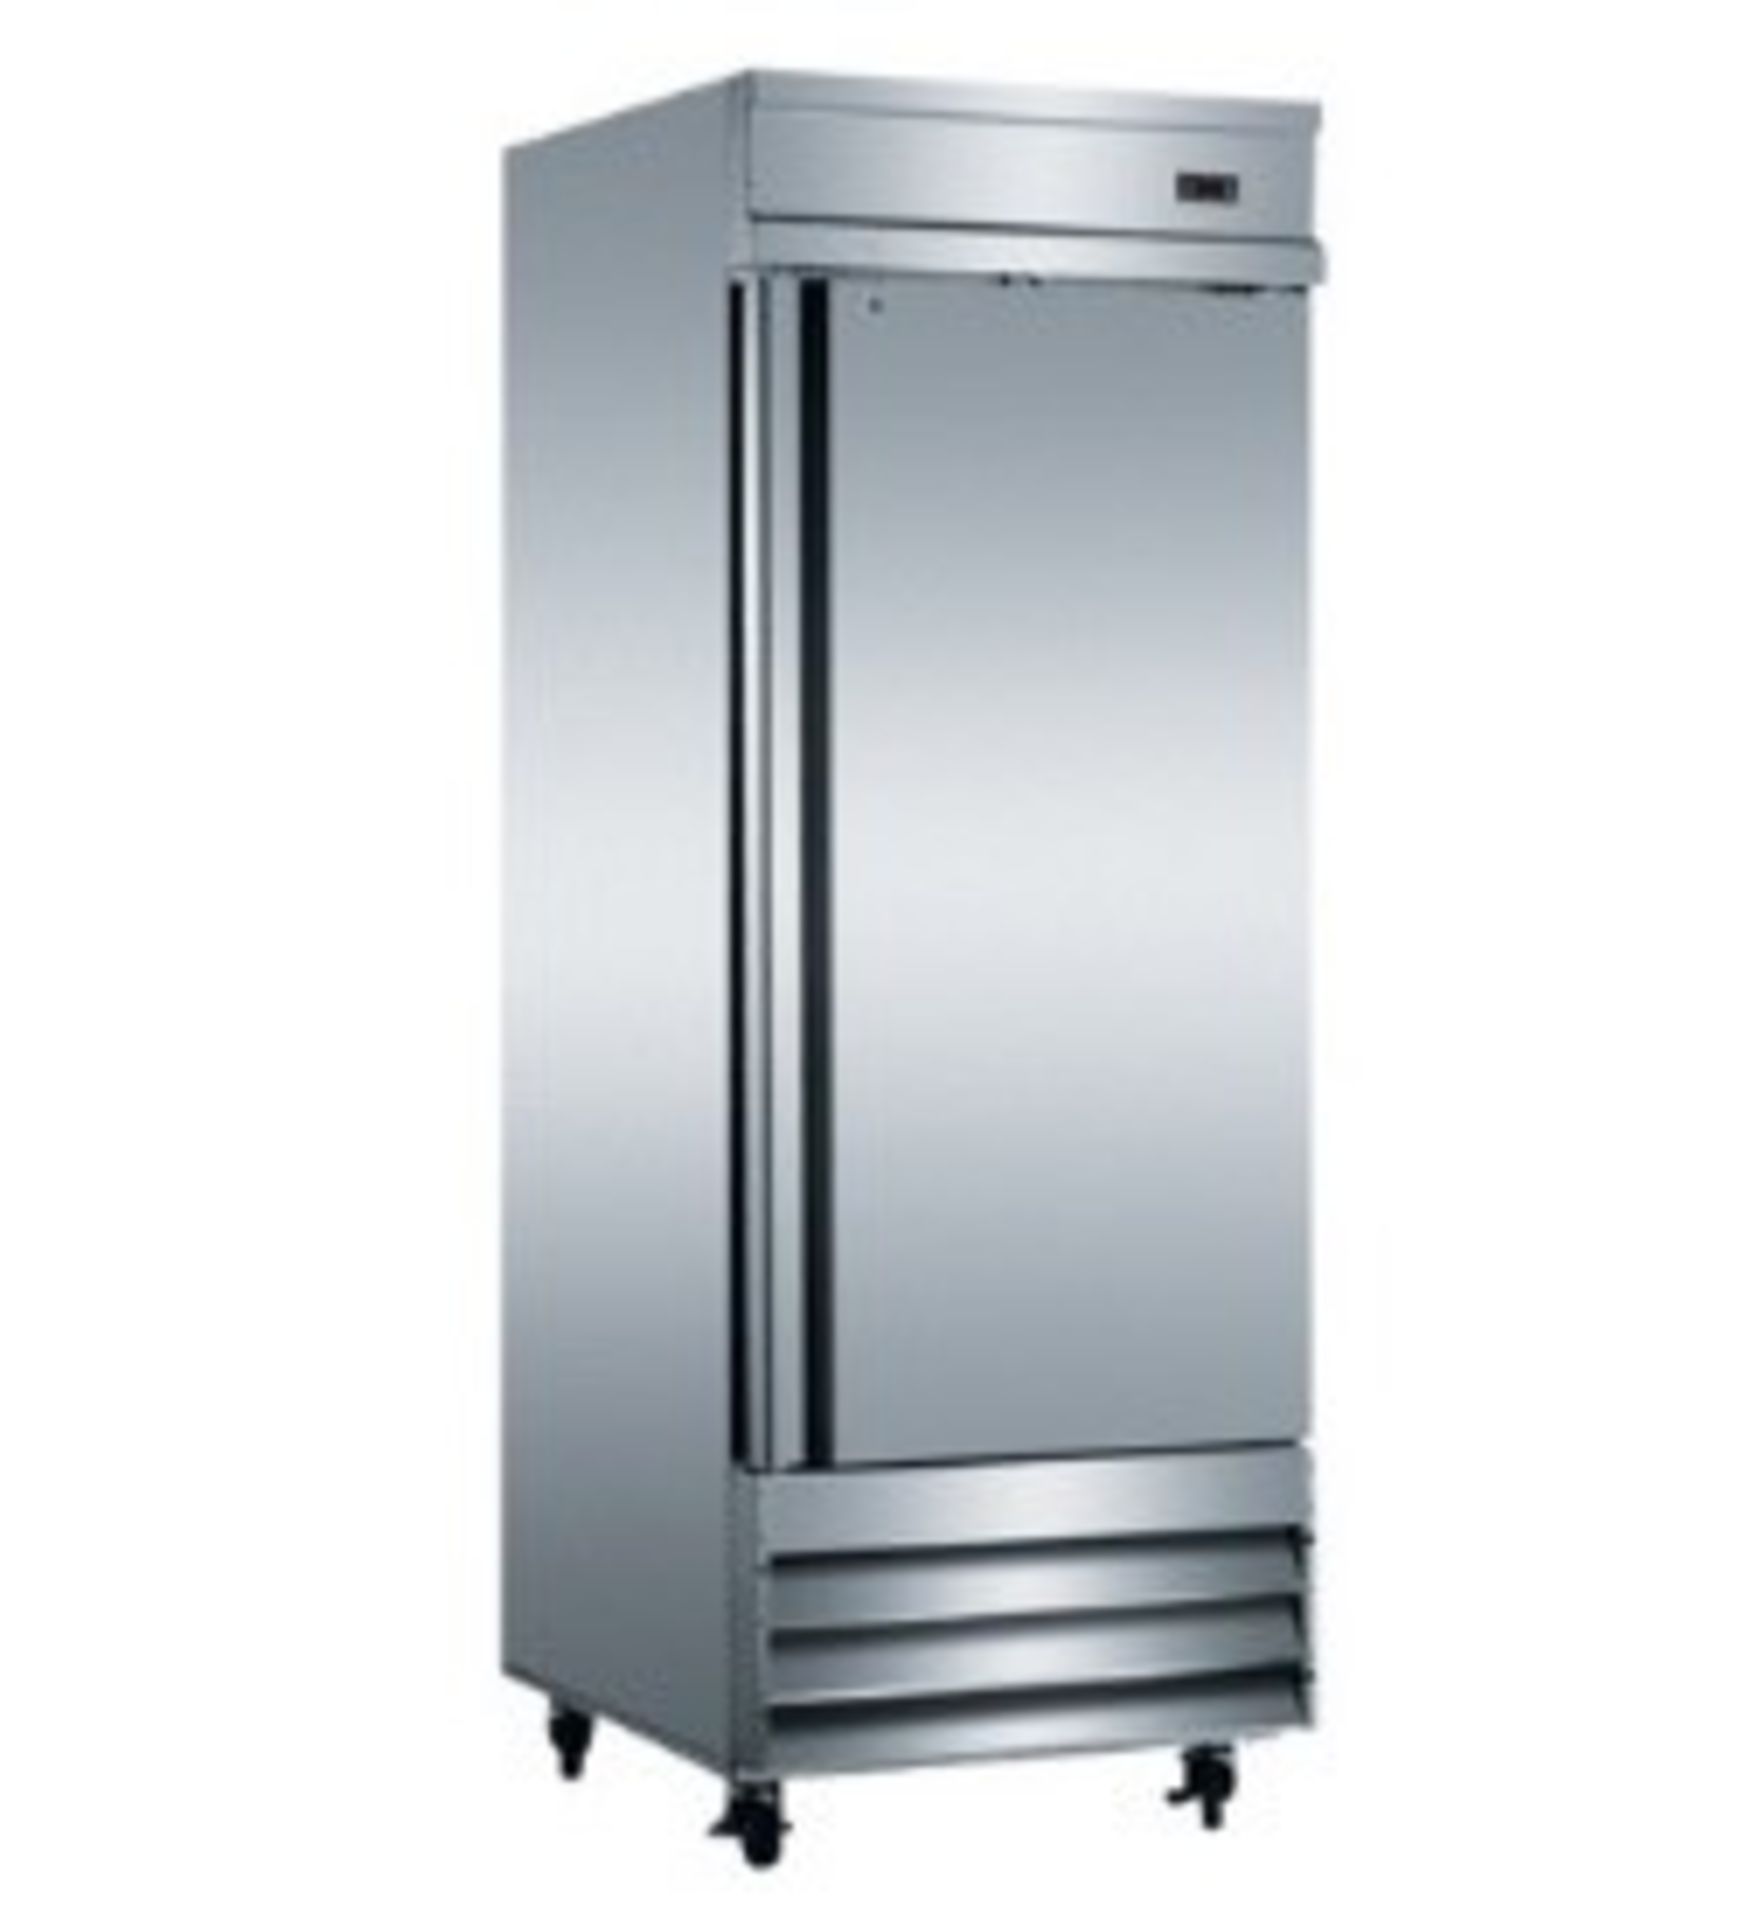 EQ  Stainless Steel Reach-In Freezer 172 Gal, Silver Model #:CFD-1FF EHC L*W*H (inch):29*32.25*82.